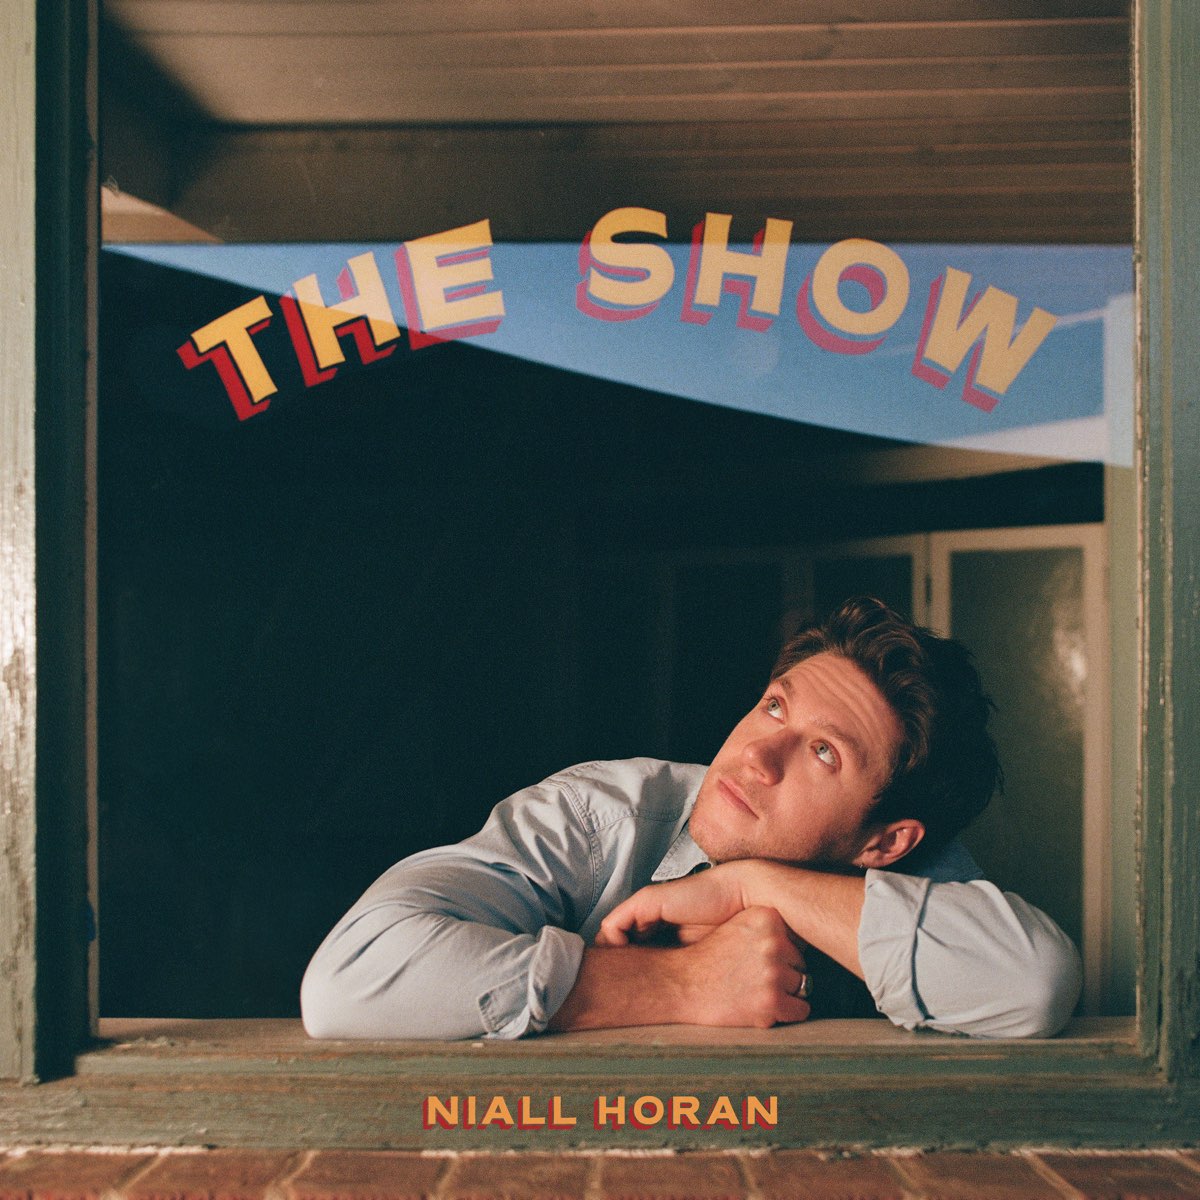 Niall Horan — You Could Start a Cult cover artwork